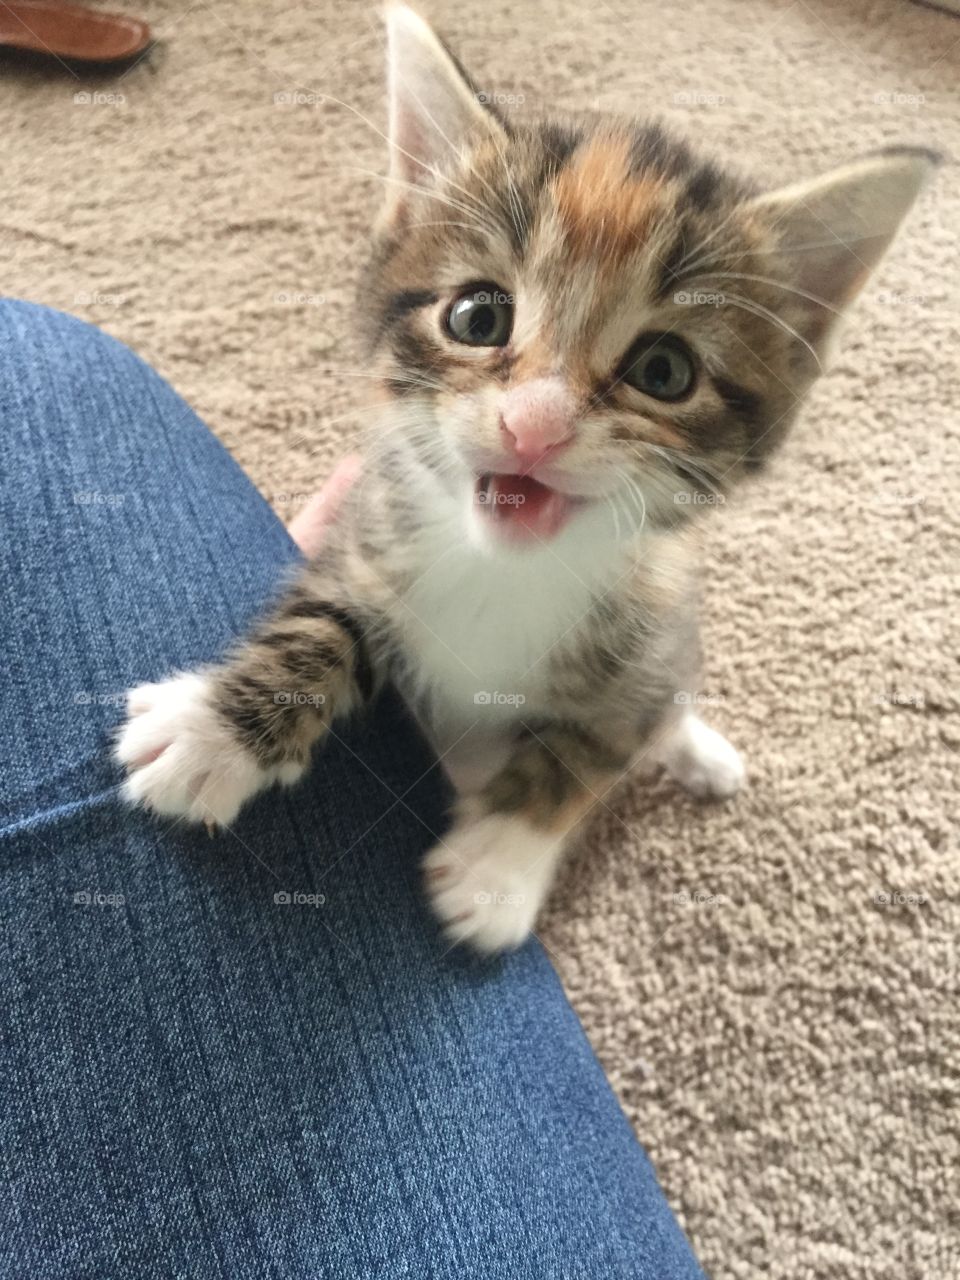 Baby kitty wanting attention 